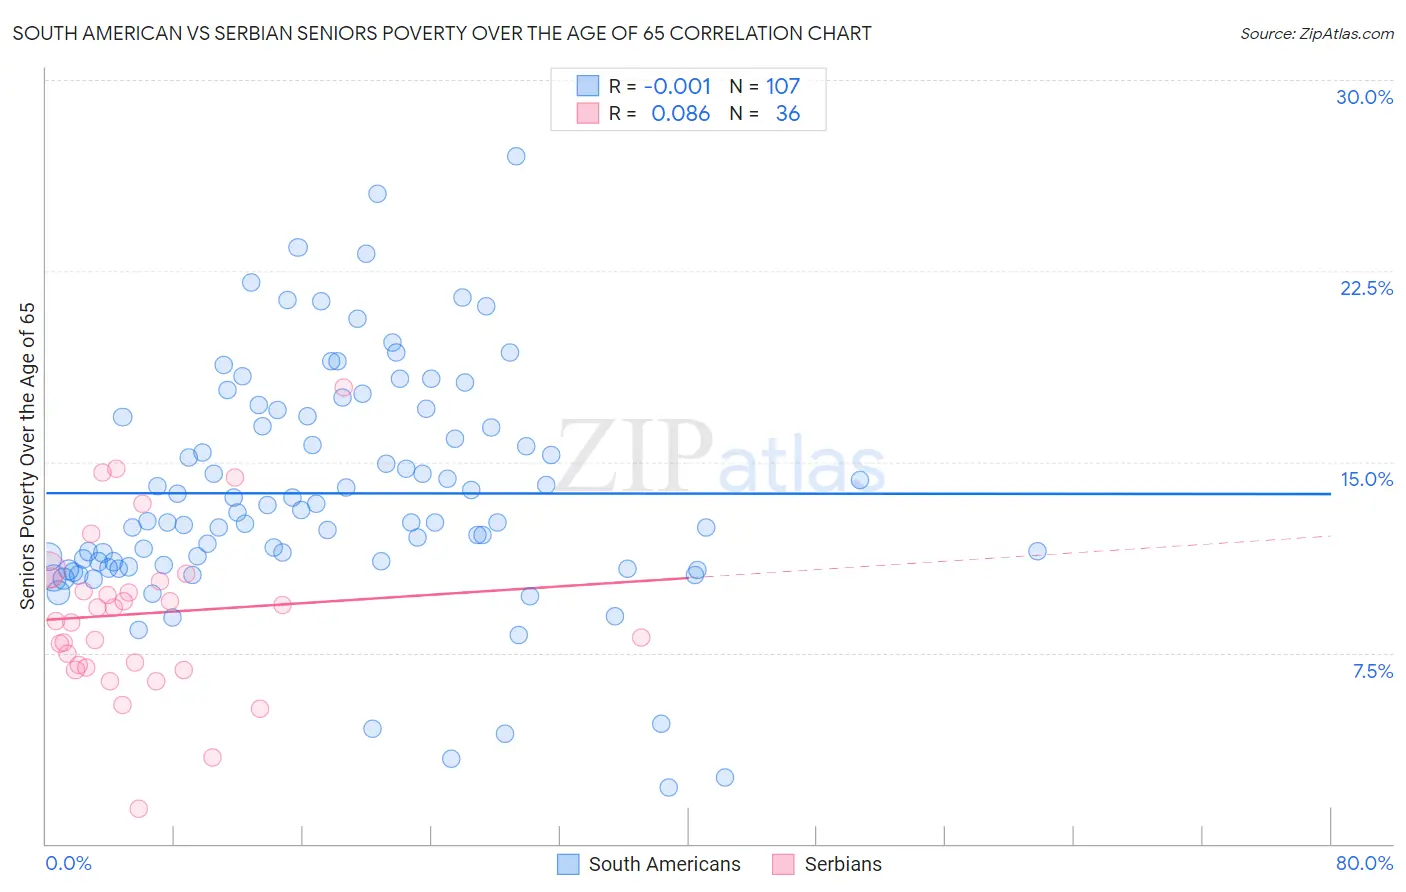 South American vs Serbian Seniors Poverty Over the Age of 65